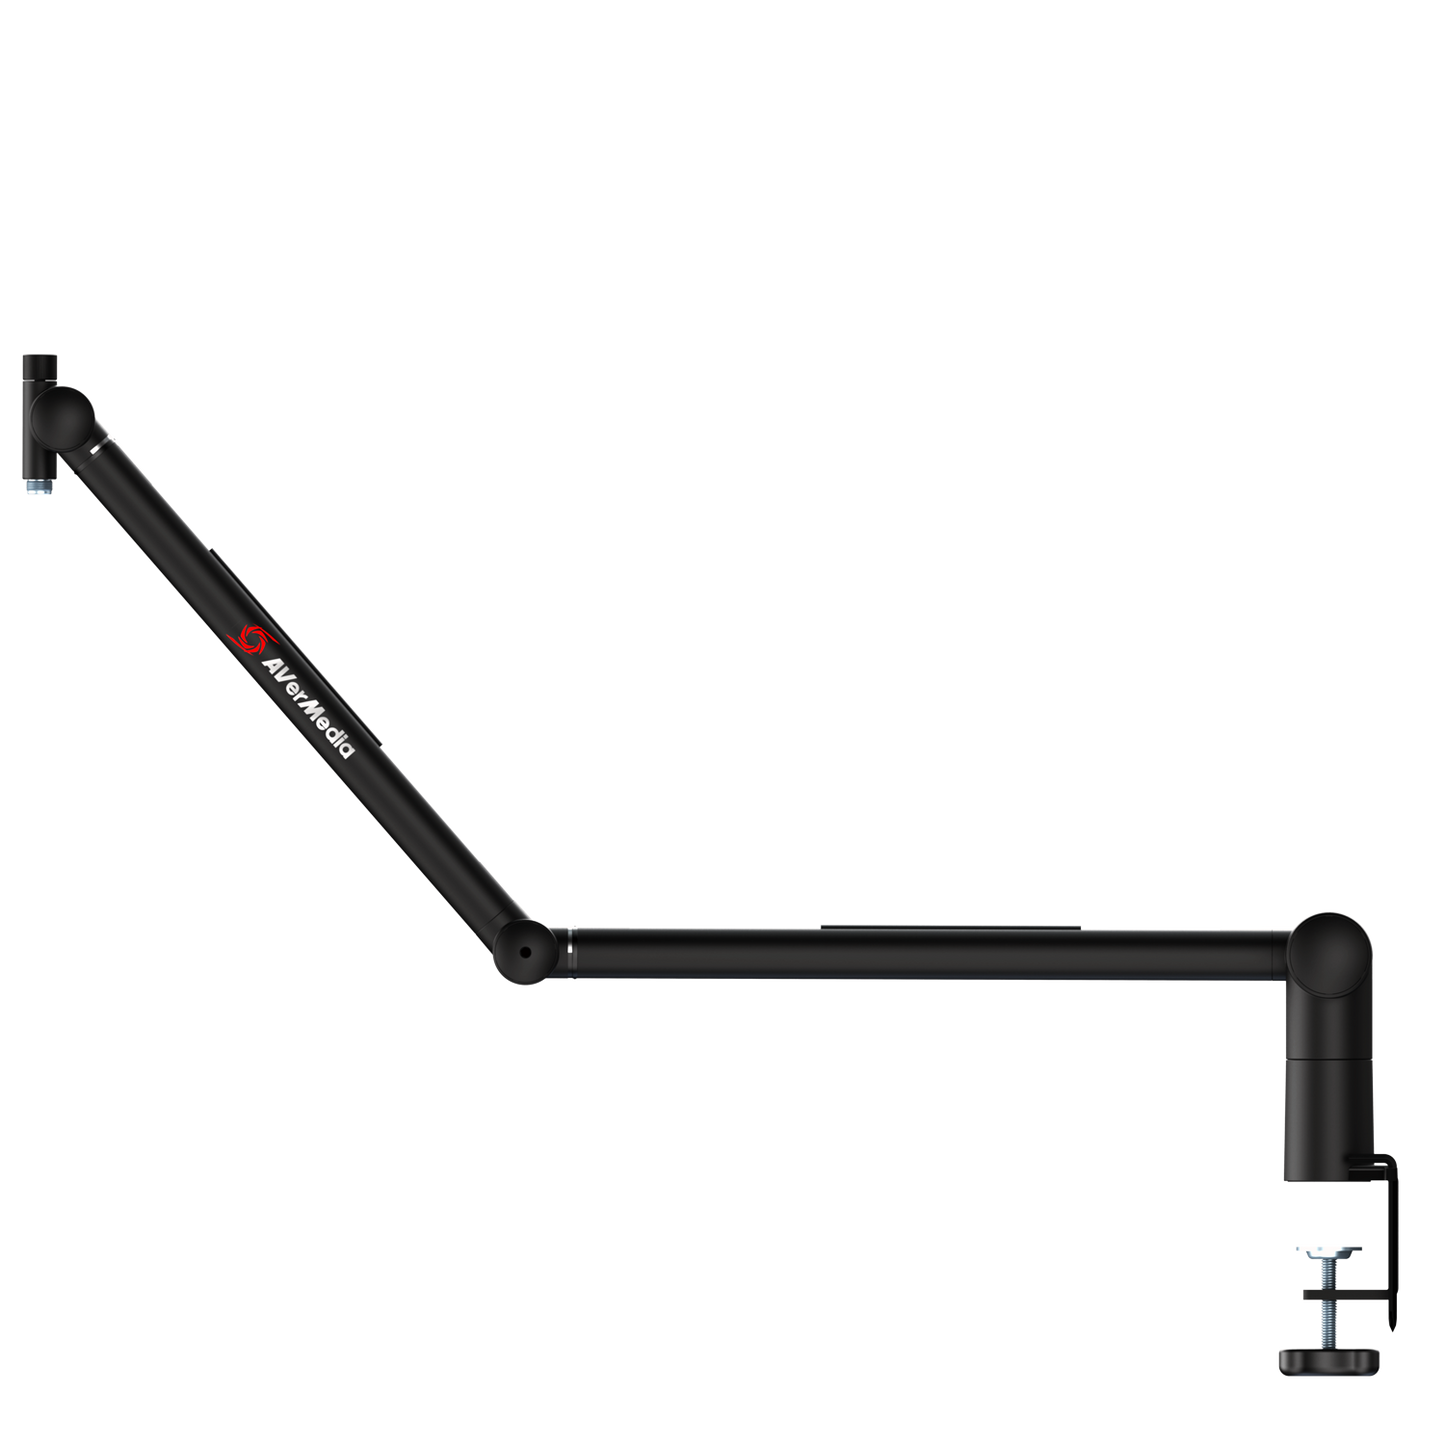 BA311 Adjustable Microphone Boom Arm with C-clamp